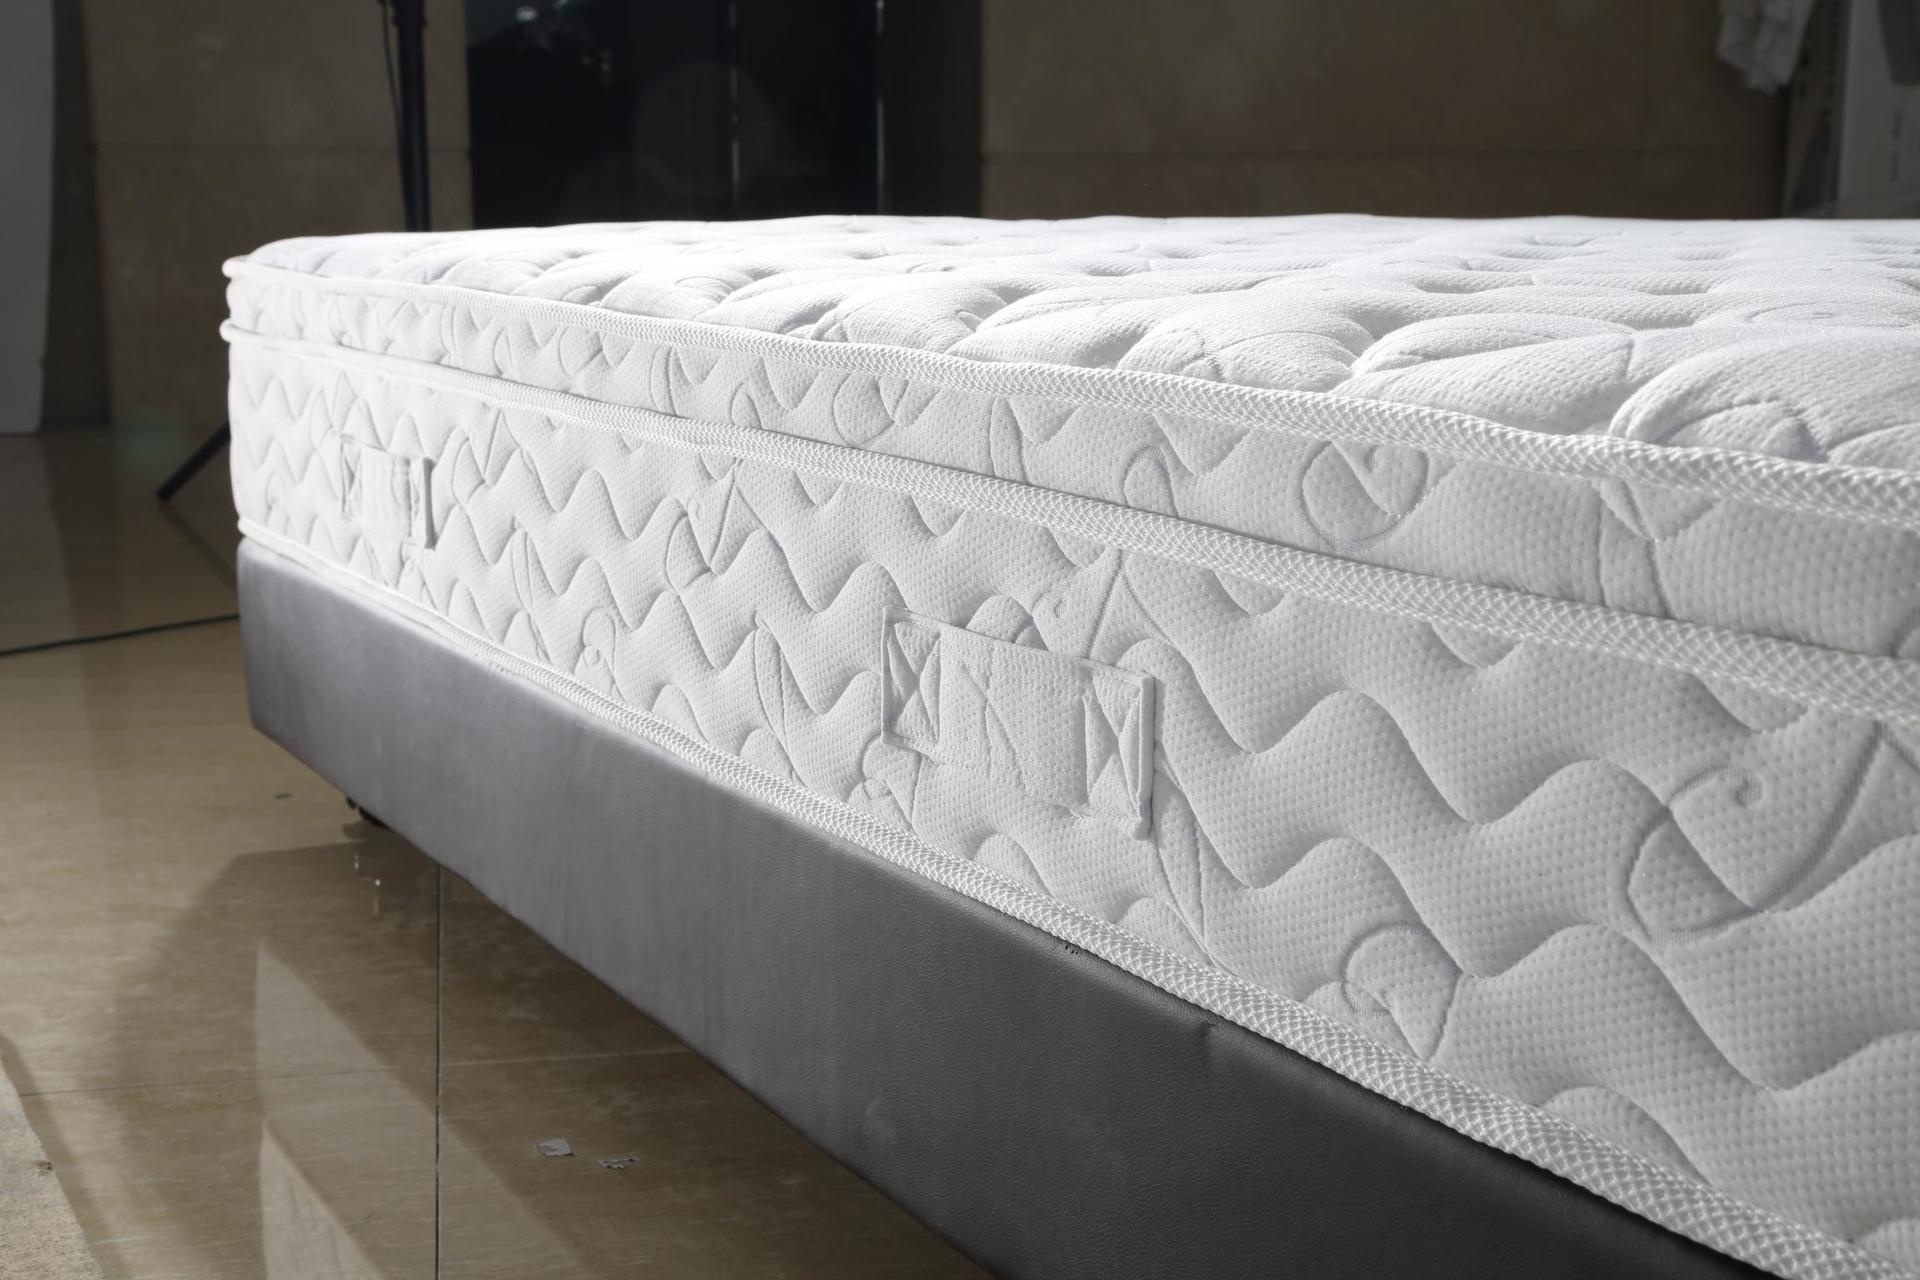 34CA-06 Continuous Spring Full-Size Mattress For Hotel Using With Euro Top Design